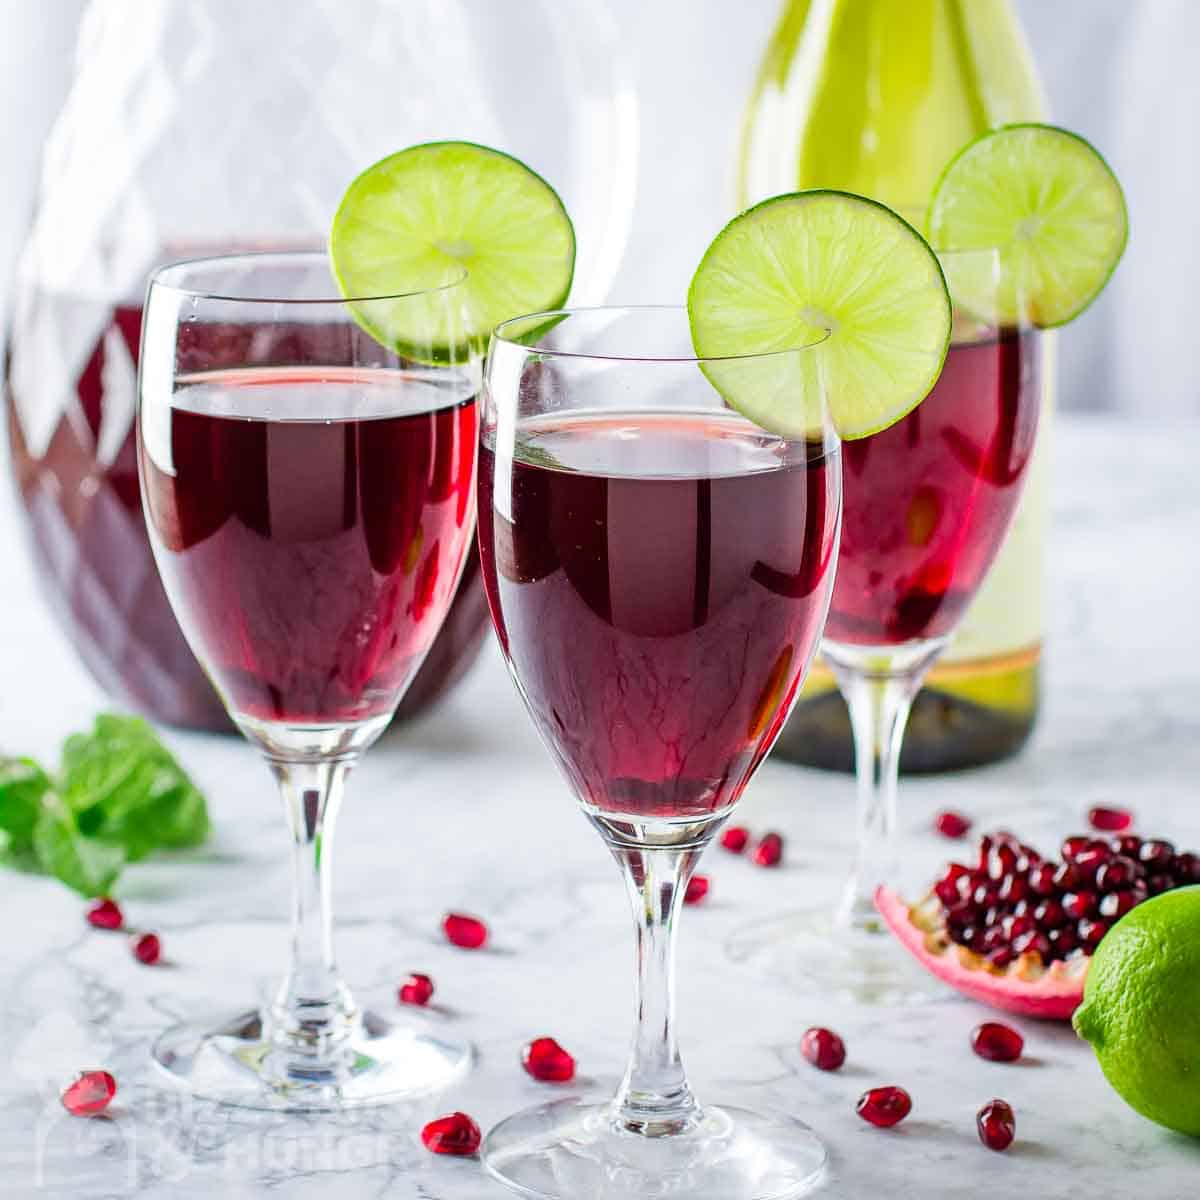 Pomegranate Spritzer Cocktail With Lime